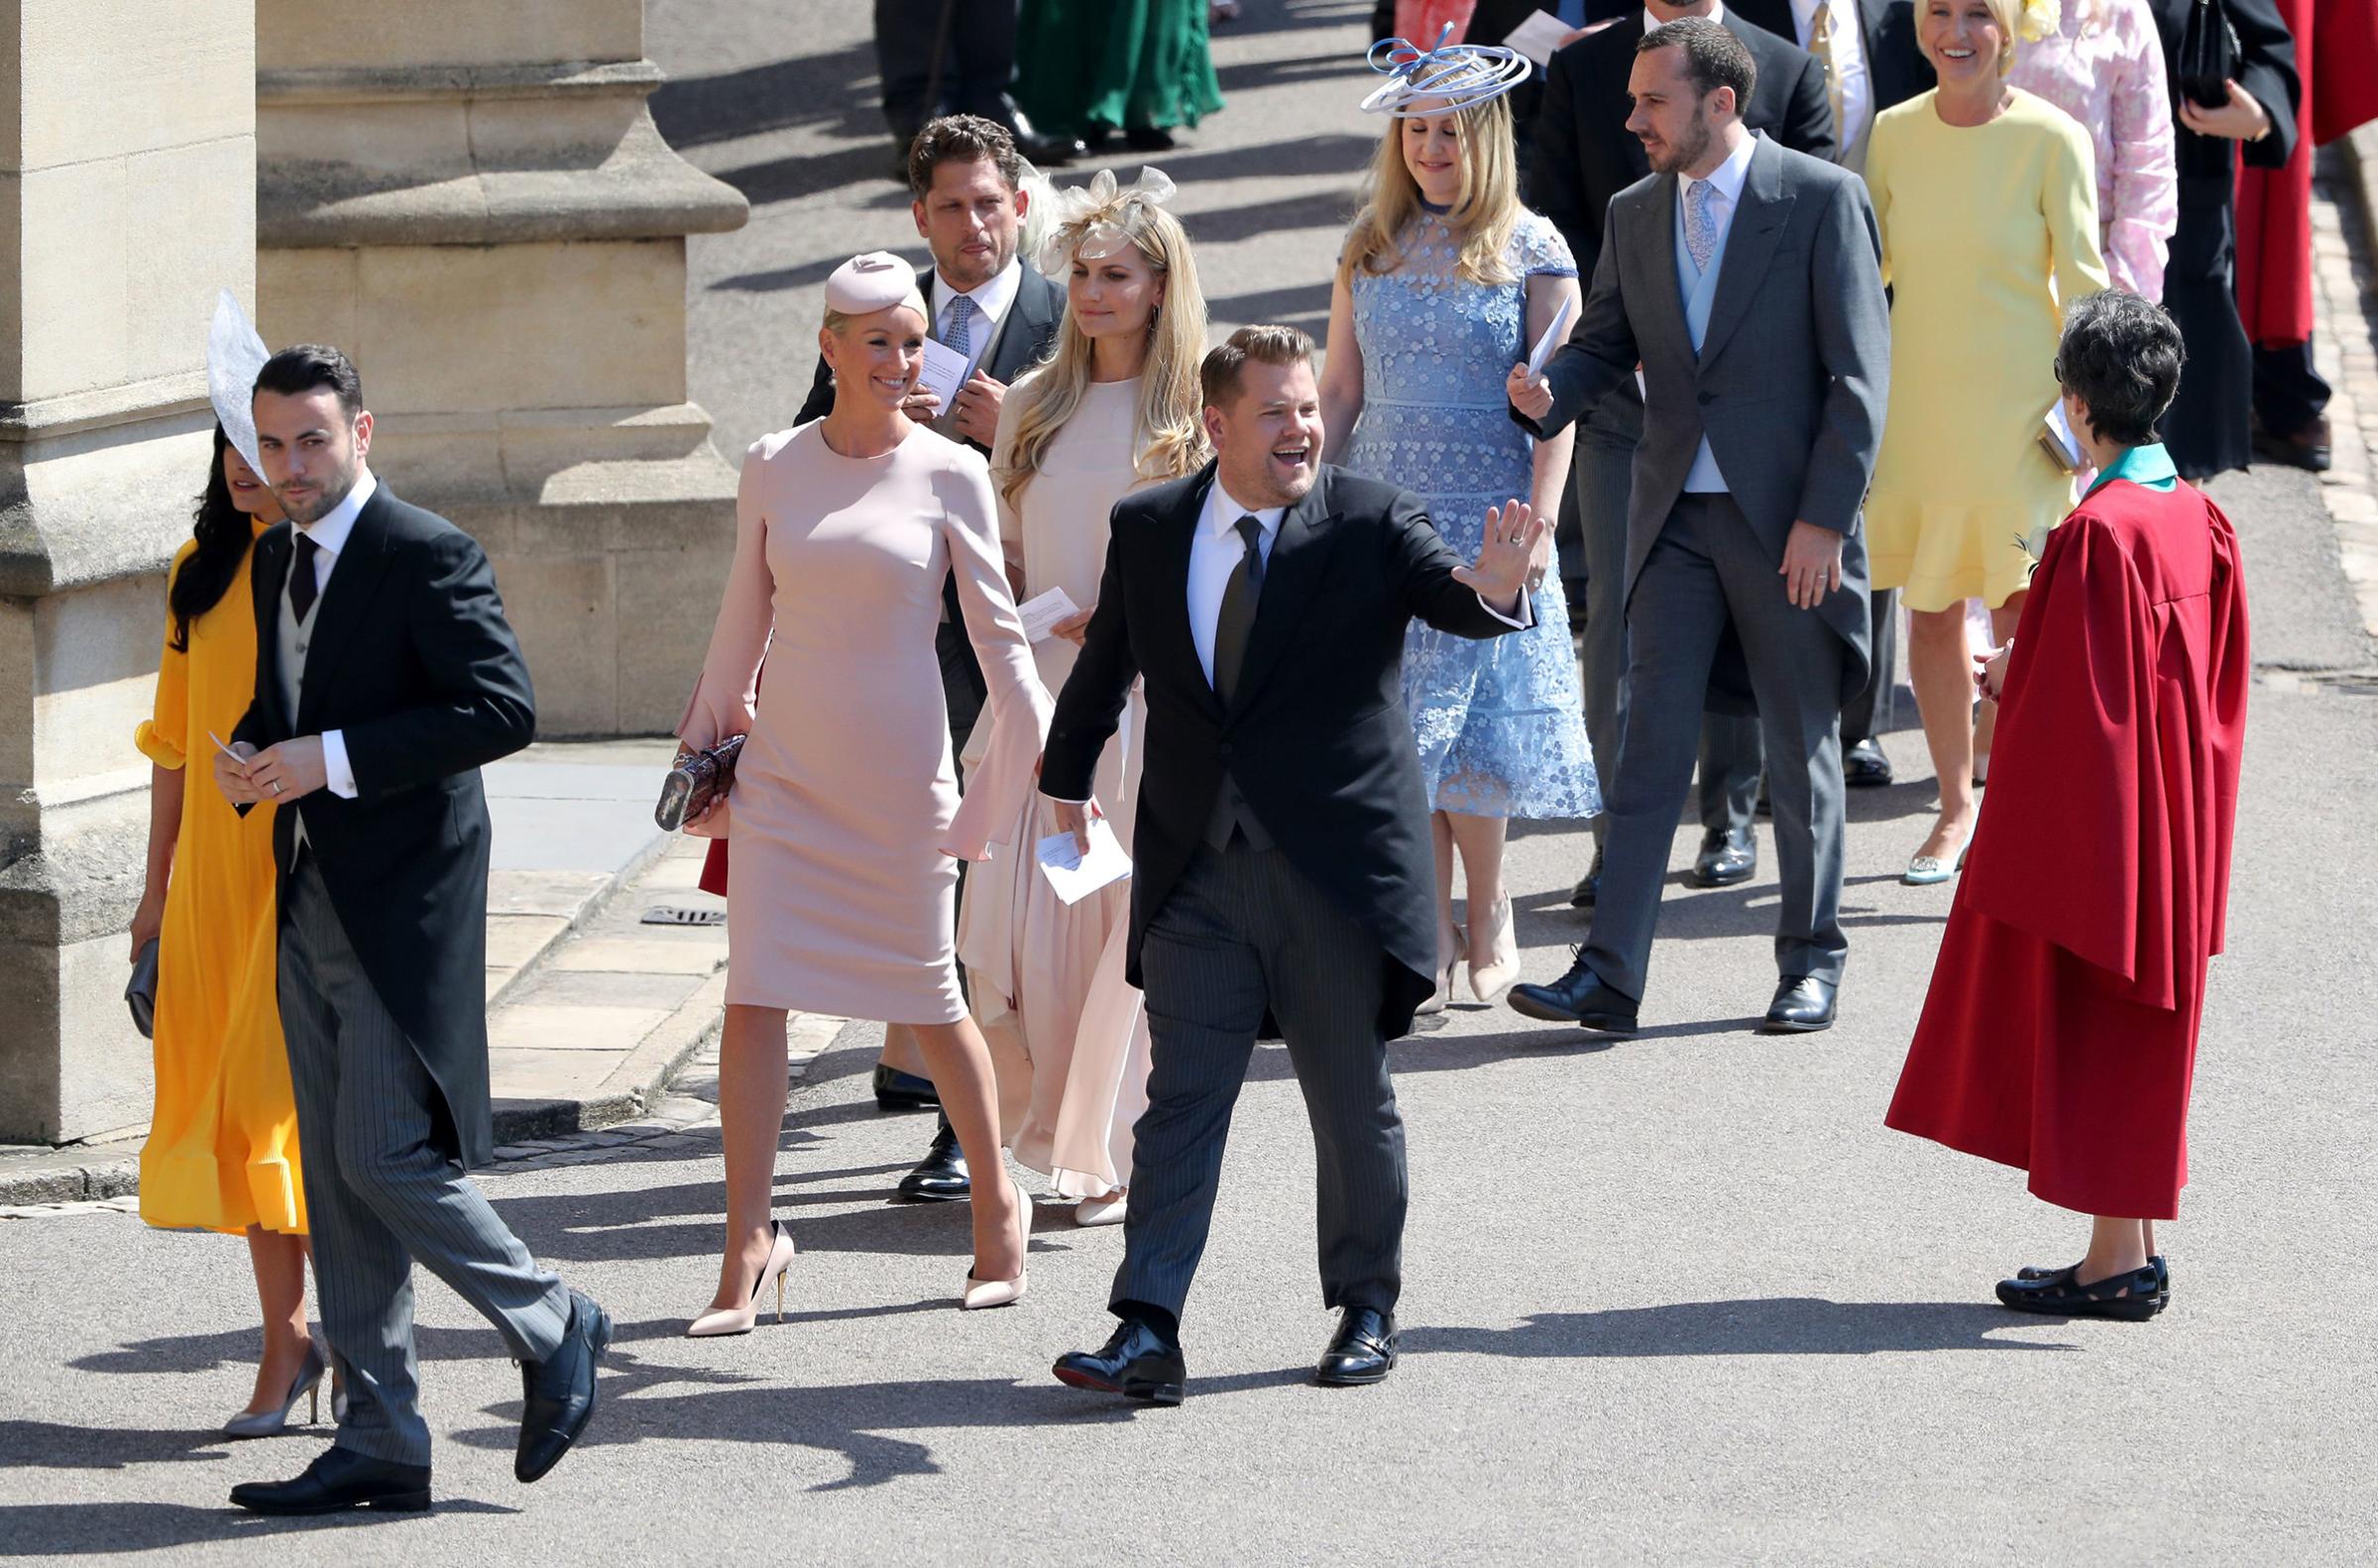 James Corden and Julia Carey arrive for the wedding ceremony of Britain's Prince Harry, Duke of Sussex and Meghan Markle at St George's Chapel, Windsor Castle, in Windsor, on May 19, 2018.